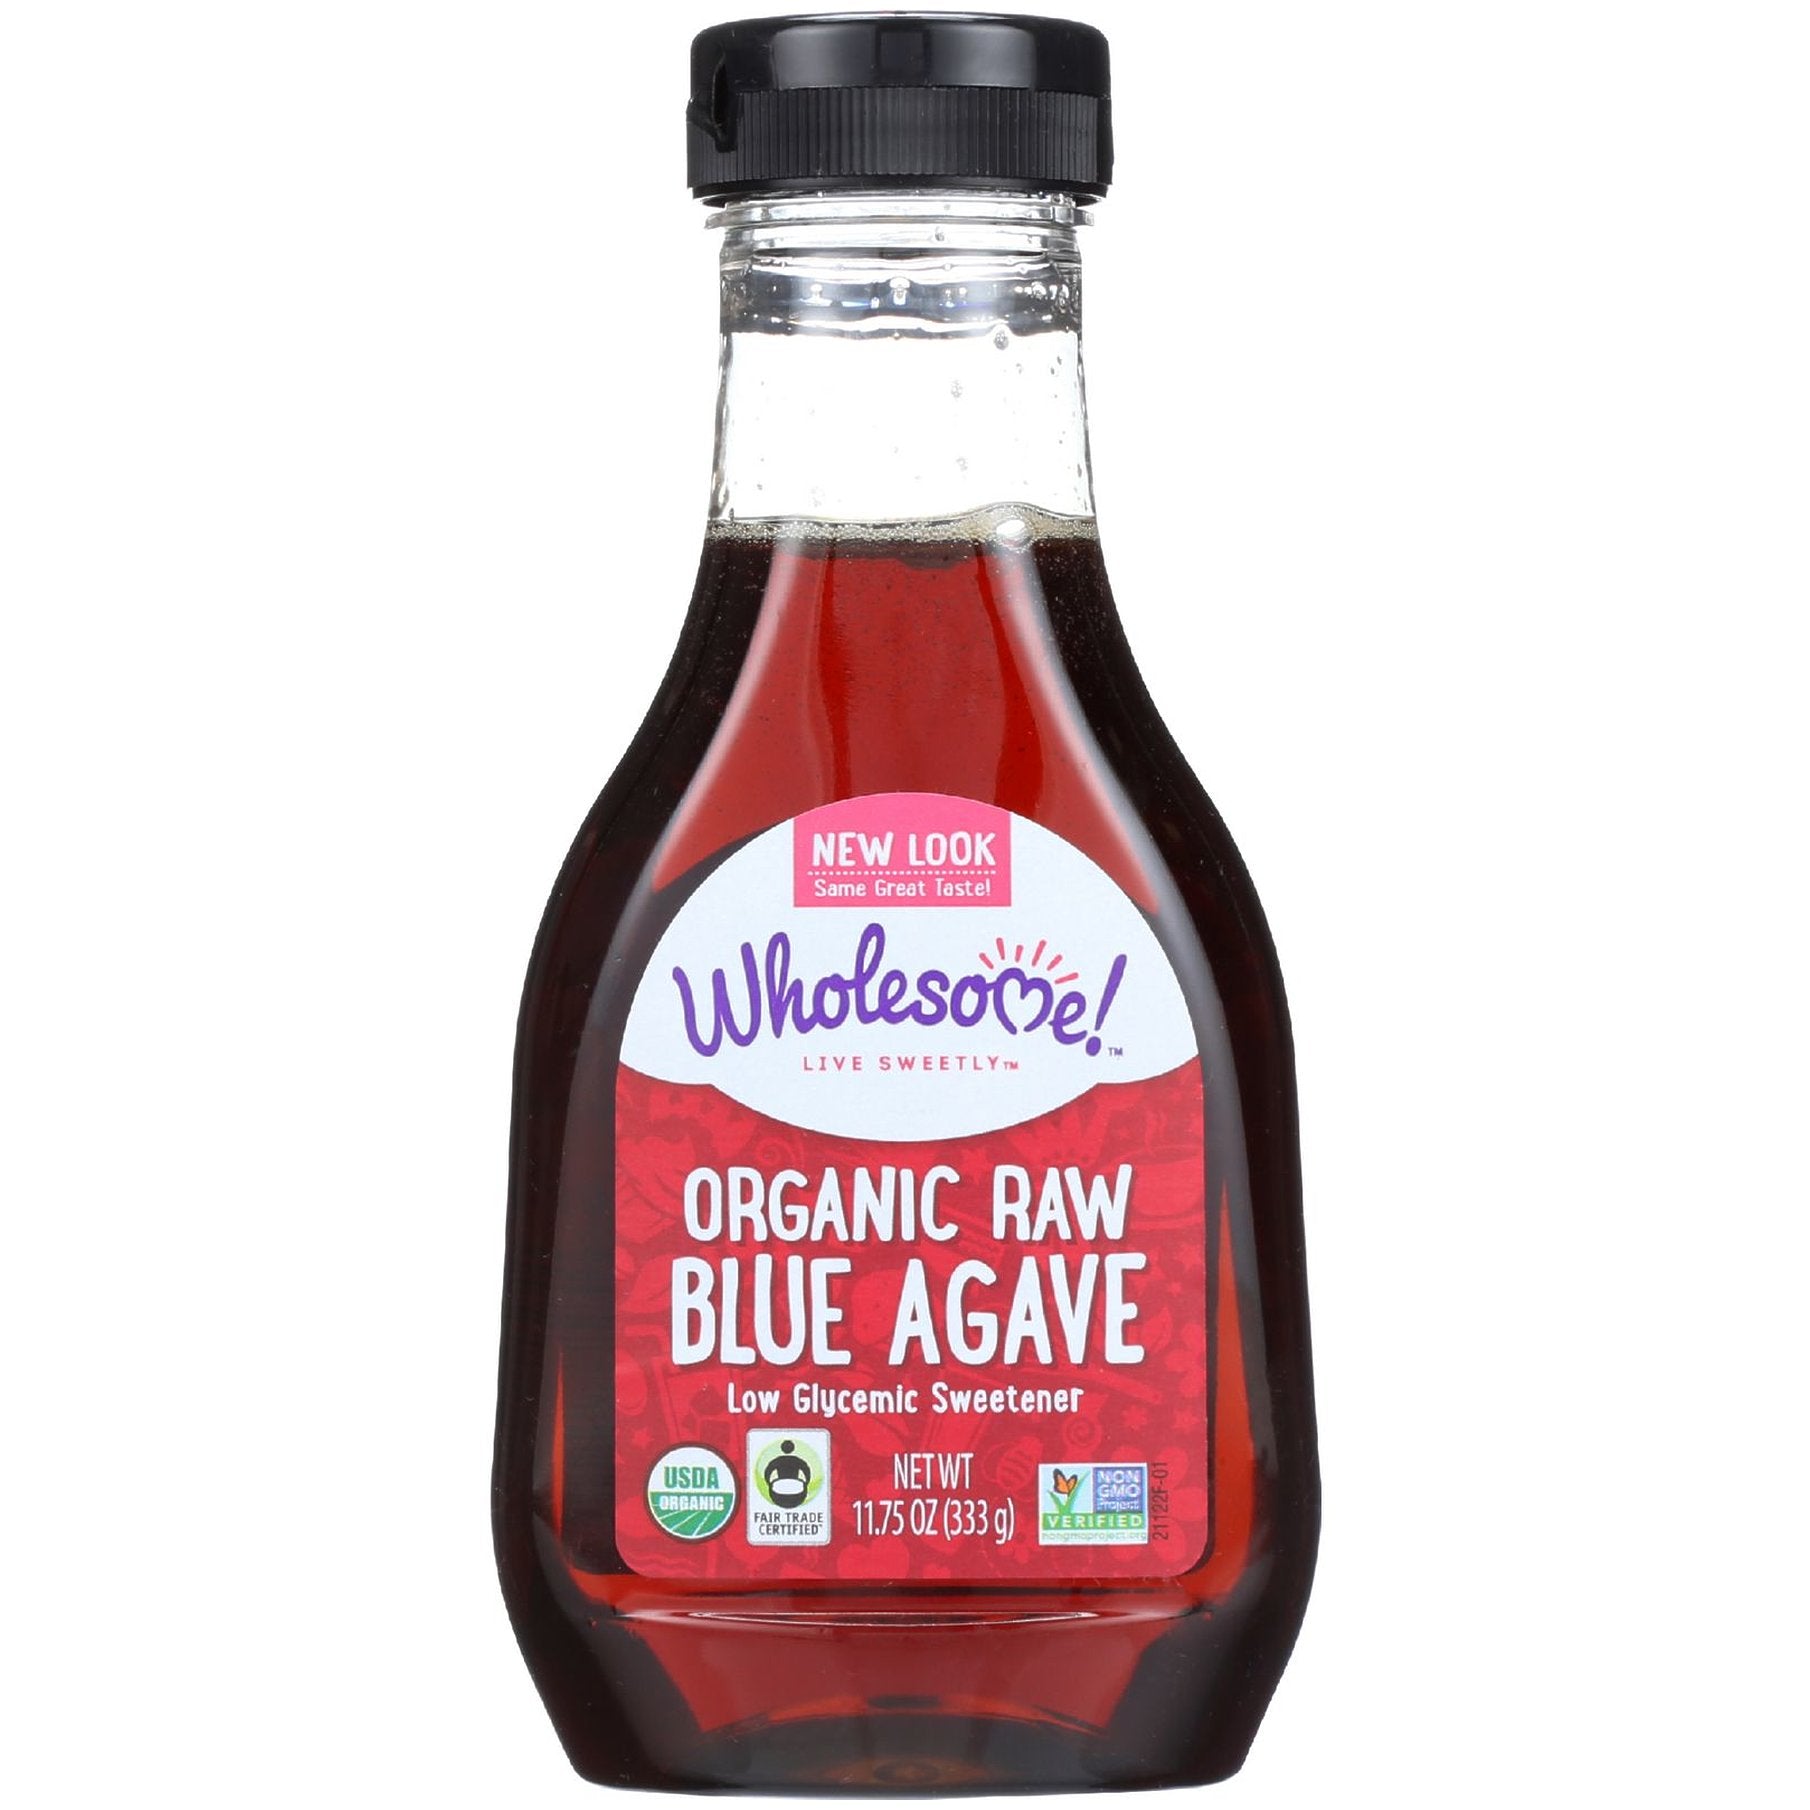 Wholesome Organic Raw Blue Agave 333g